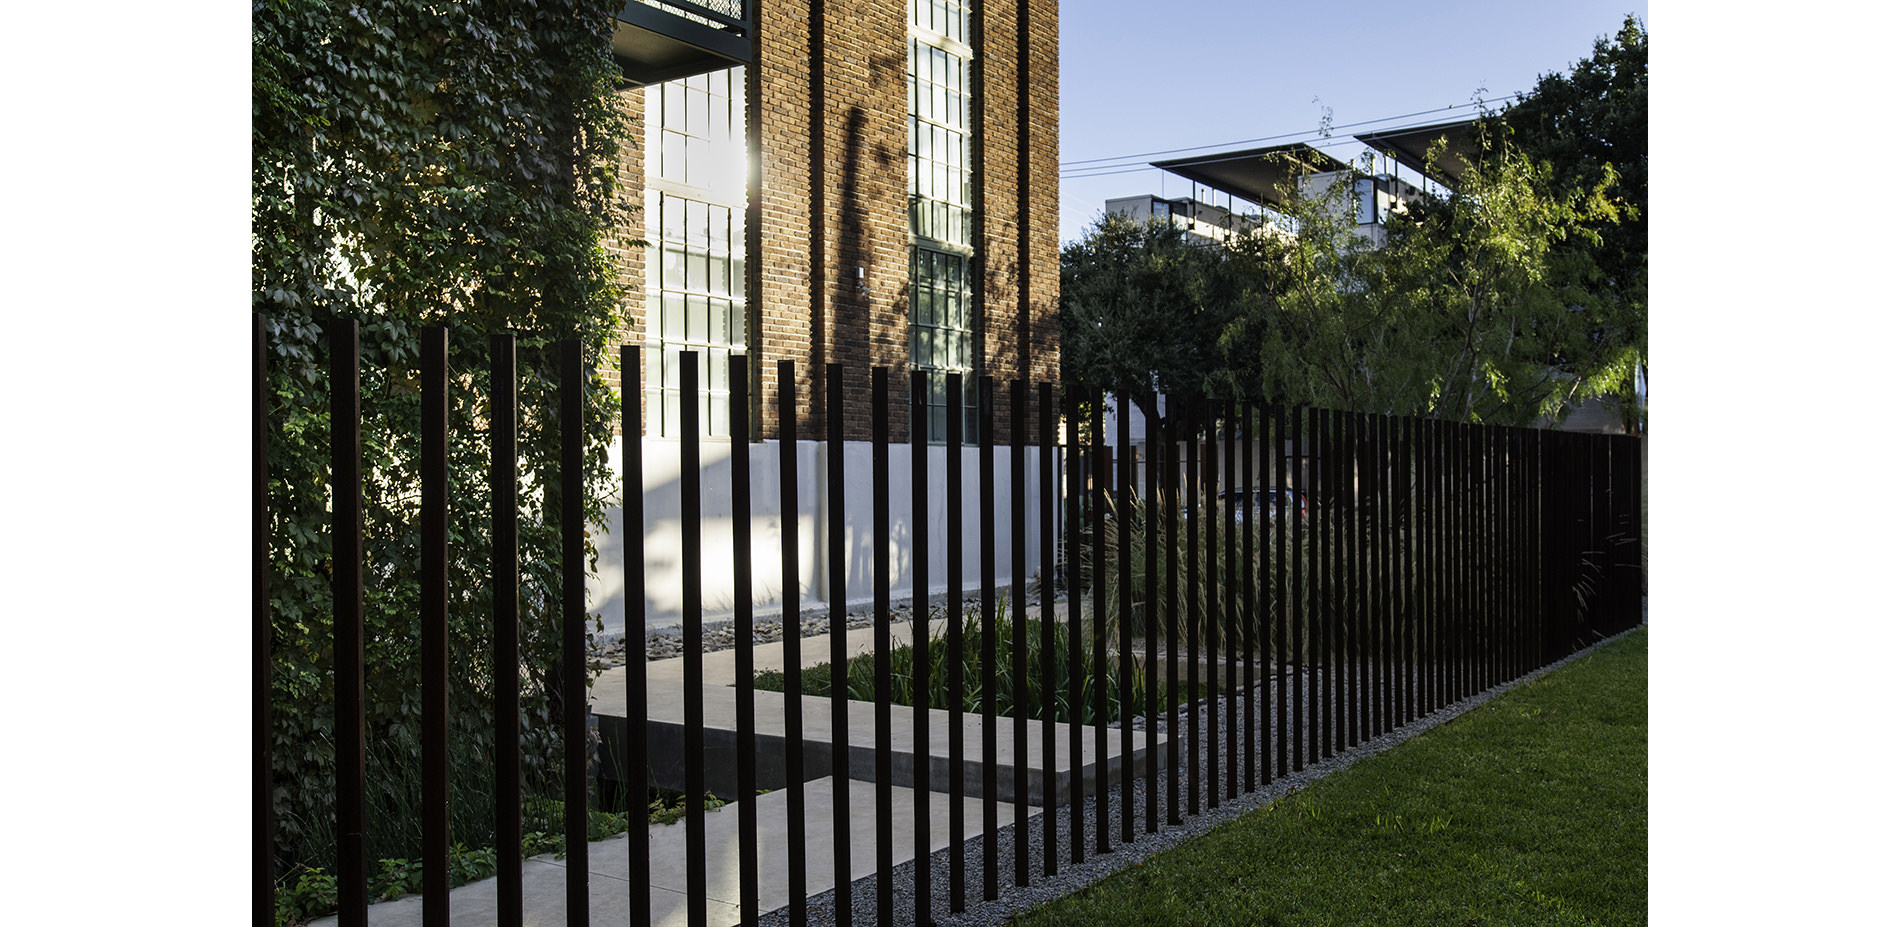 Cantilevered Steel Picket Fence and Vine Covered Stair Tower